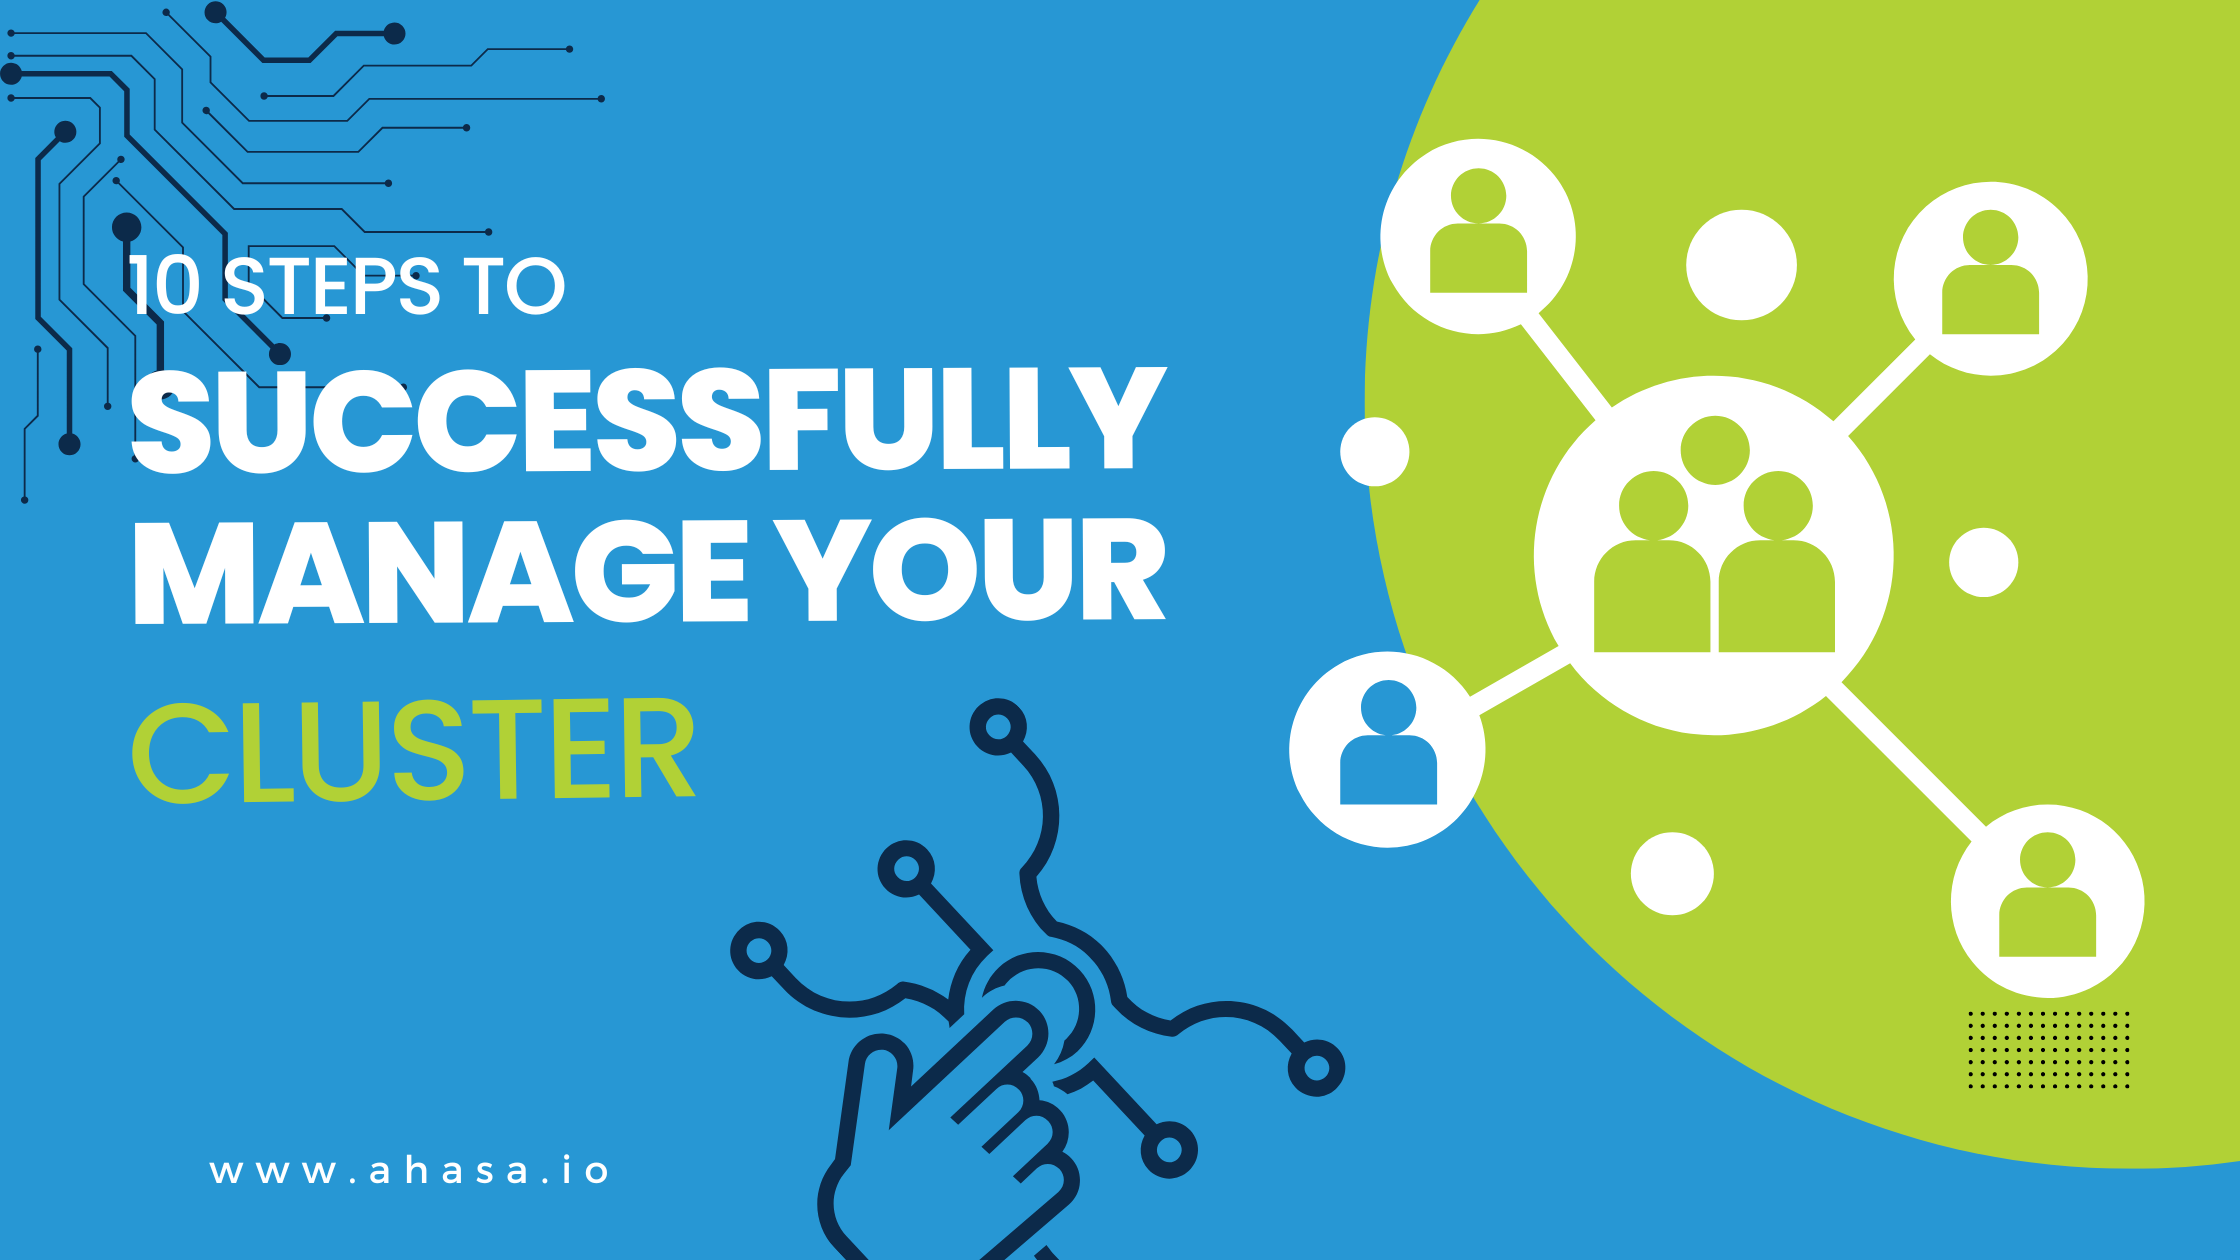 10 Steps to Successfully Manage Your Cluster